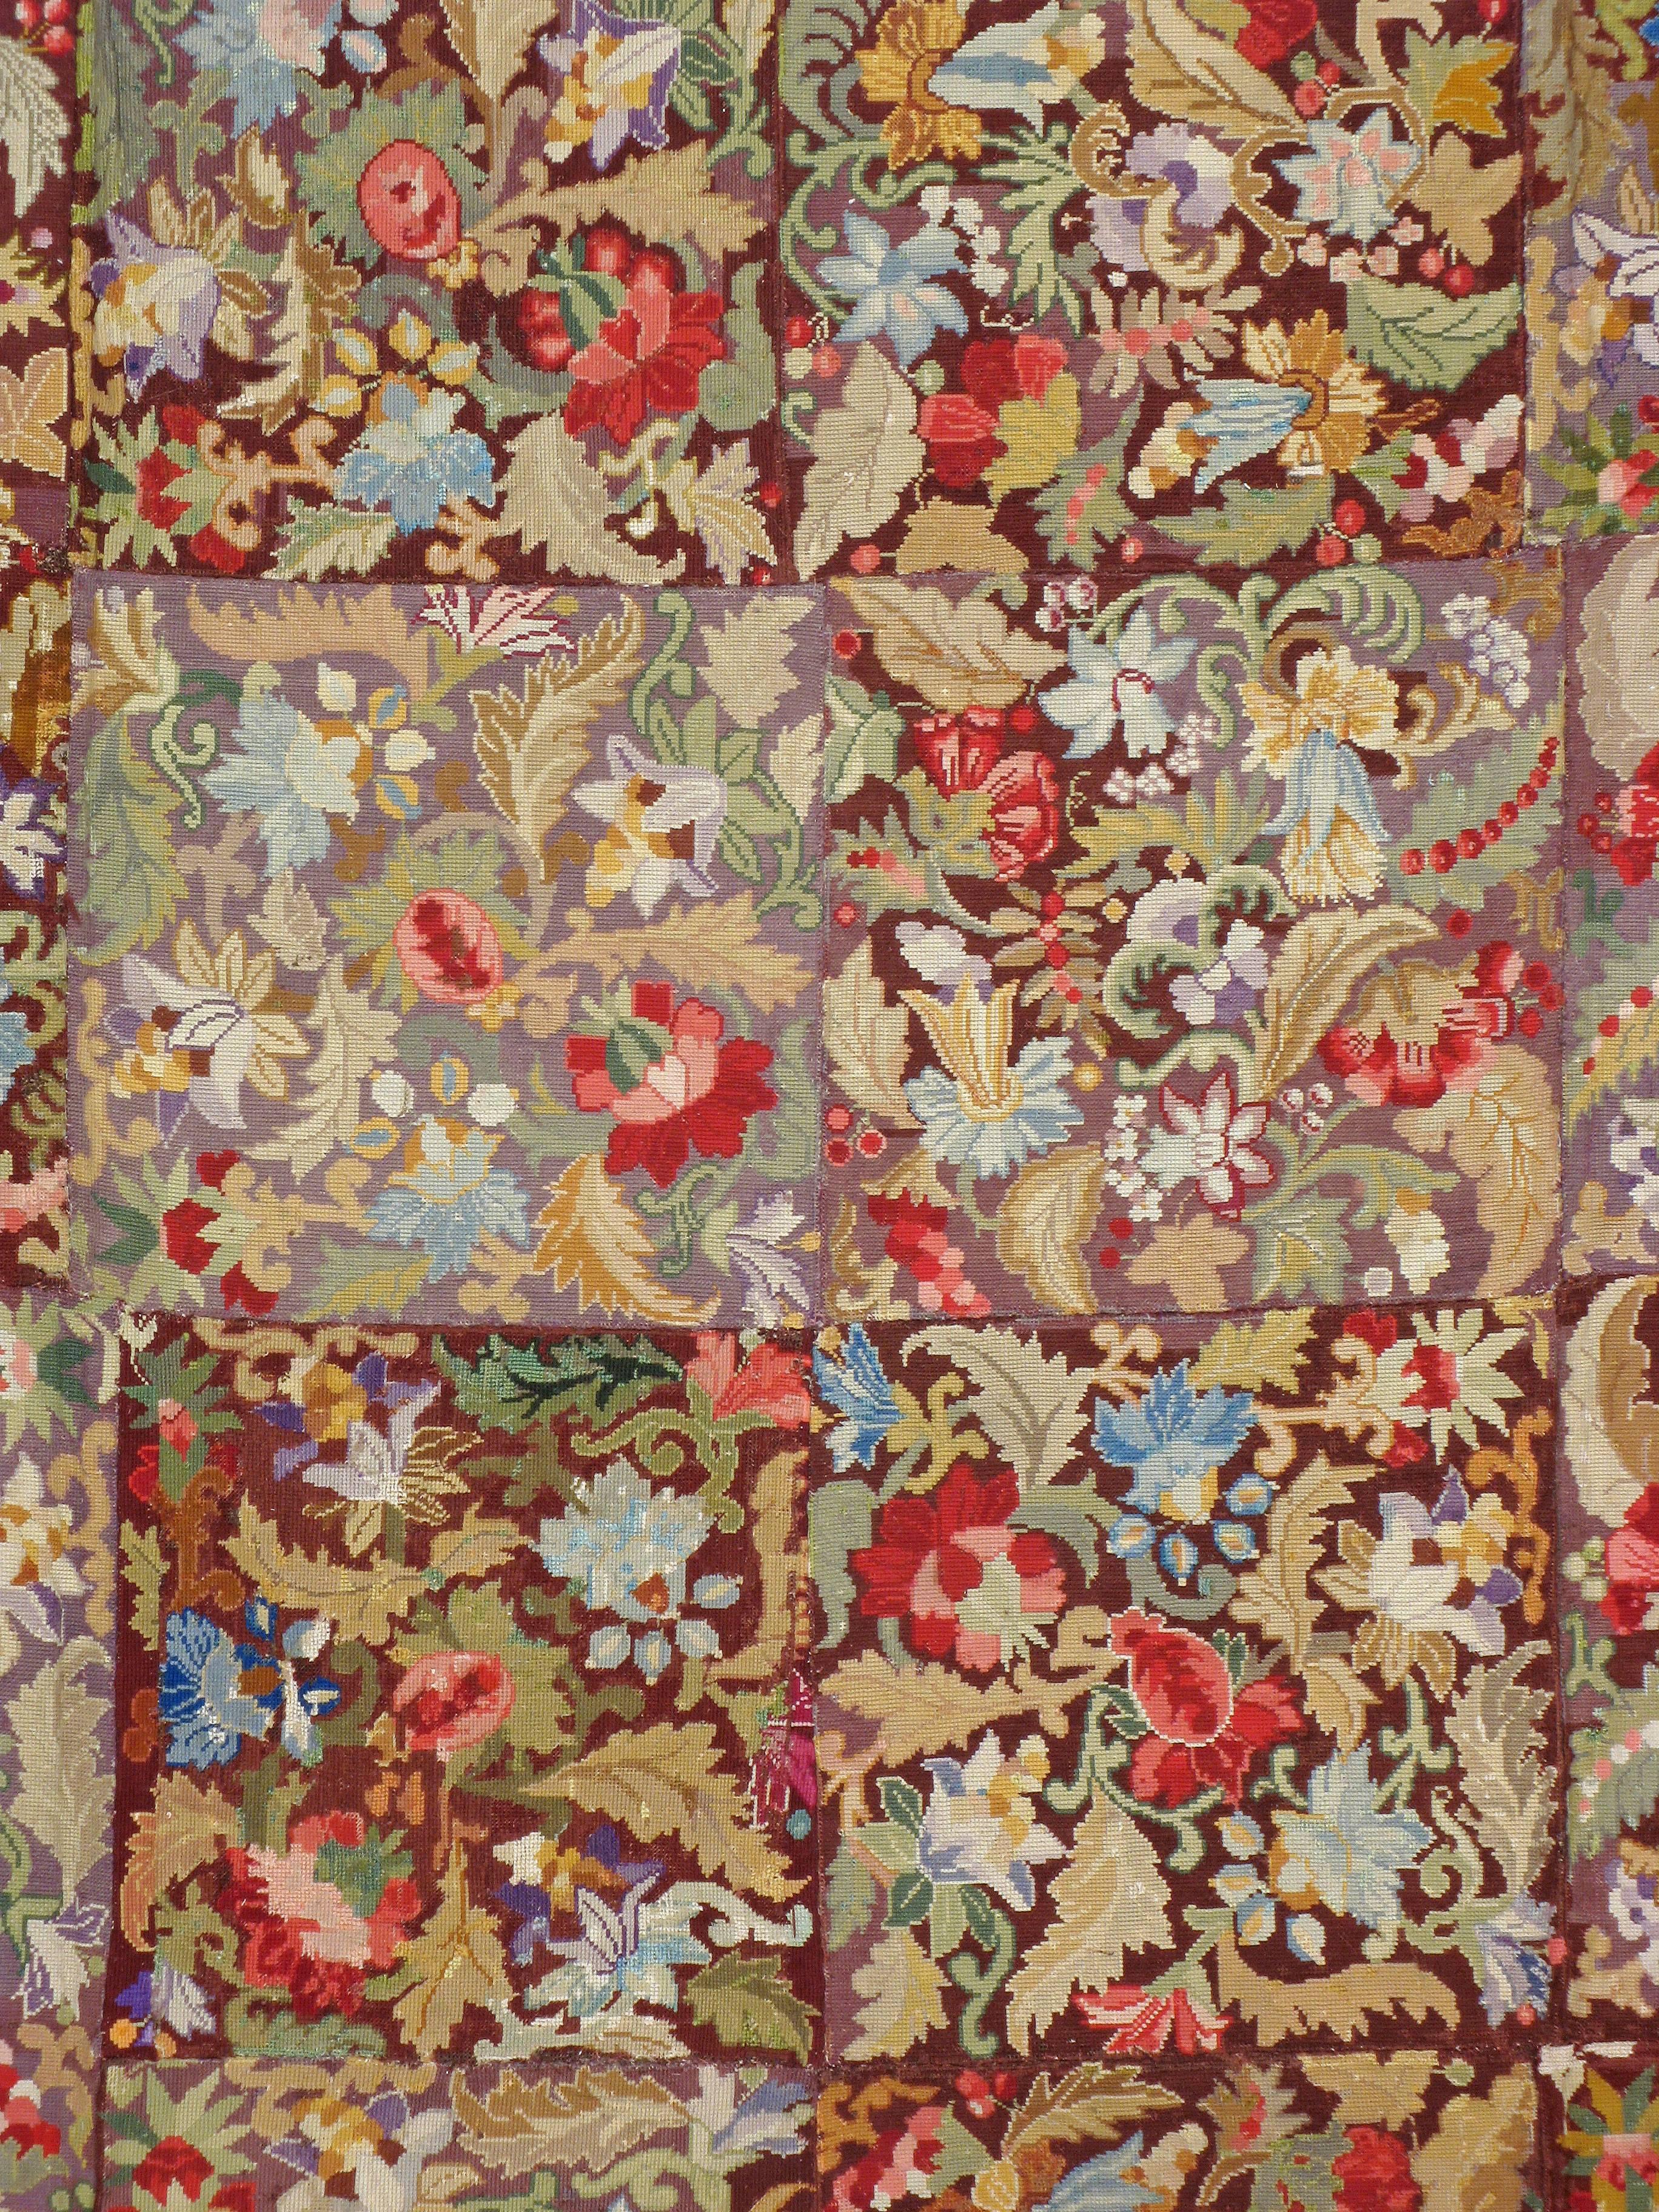 An antique English needlepoint carpet from the first quarter of the 20th century.

Measures: 9' 10